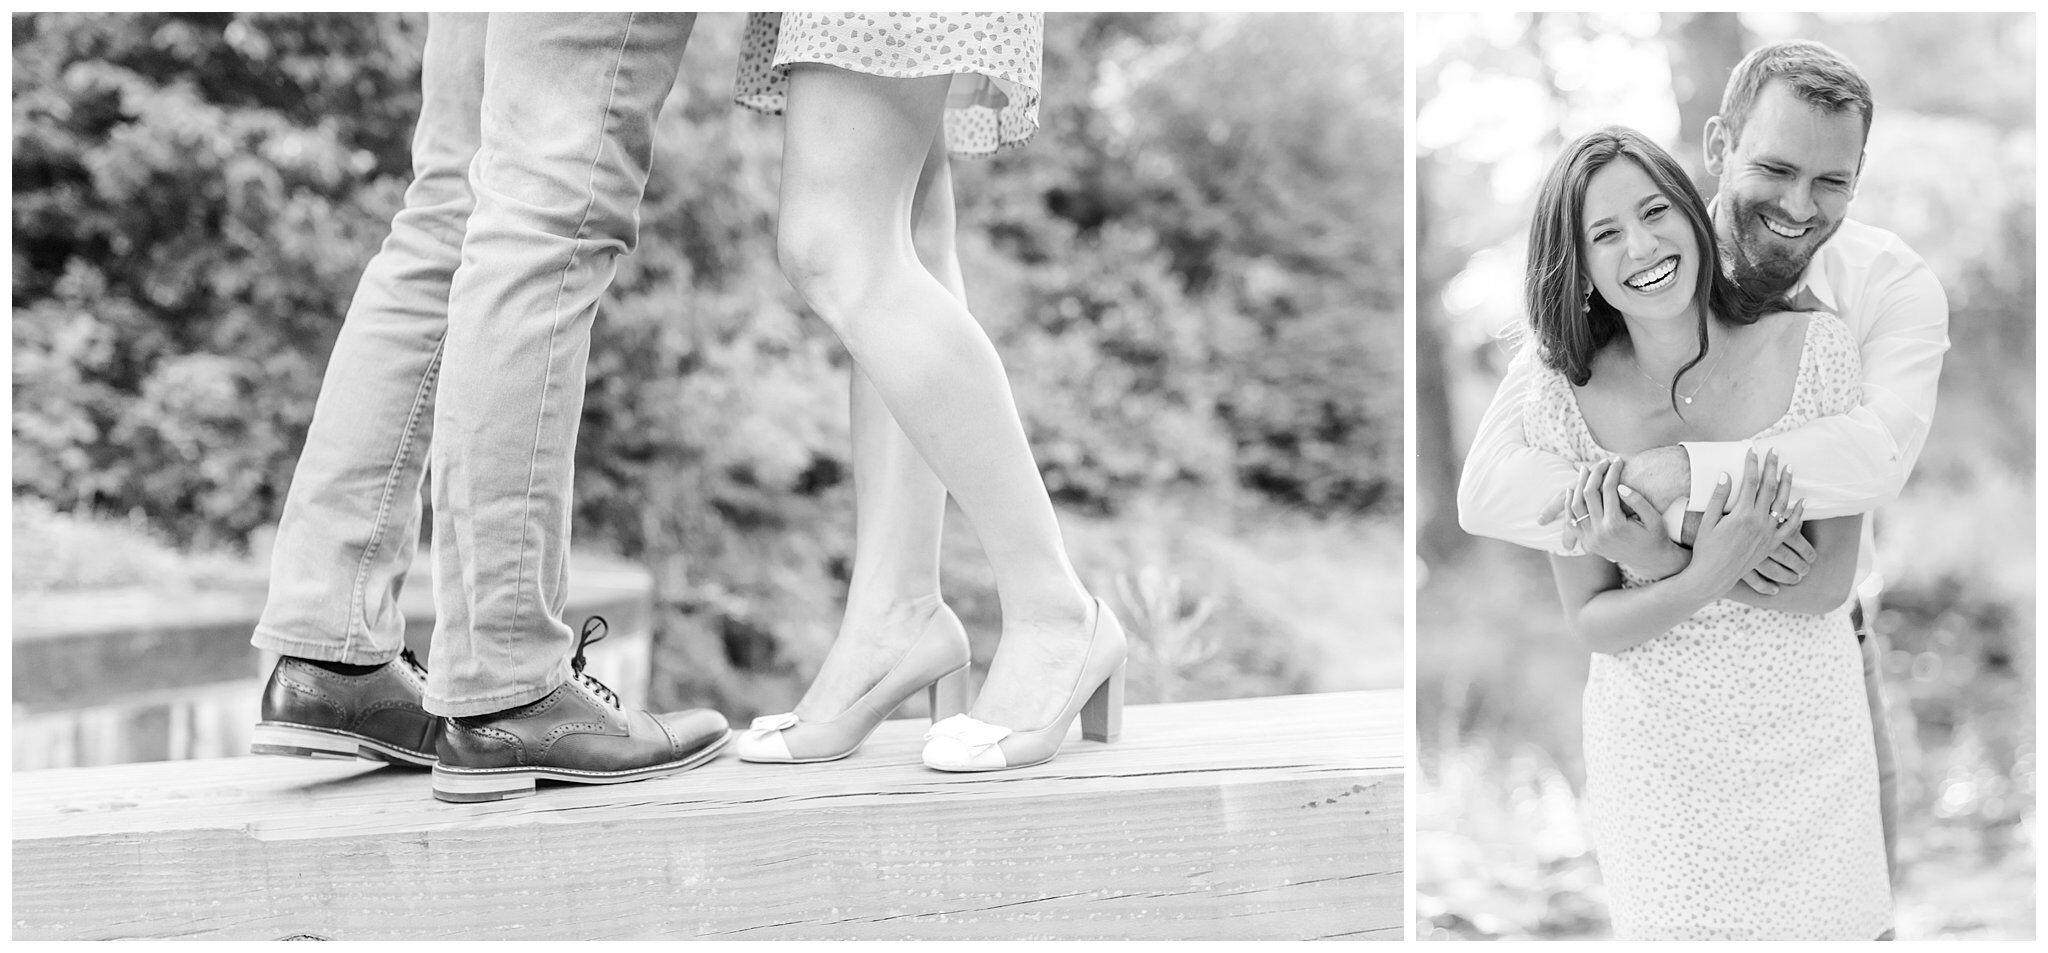 Summer Engagement Session at Great Falls National Park